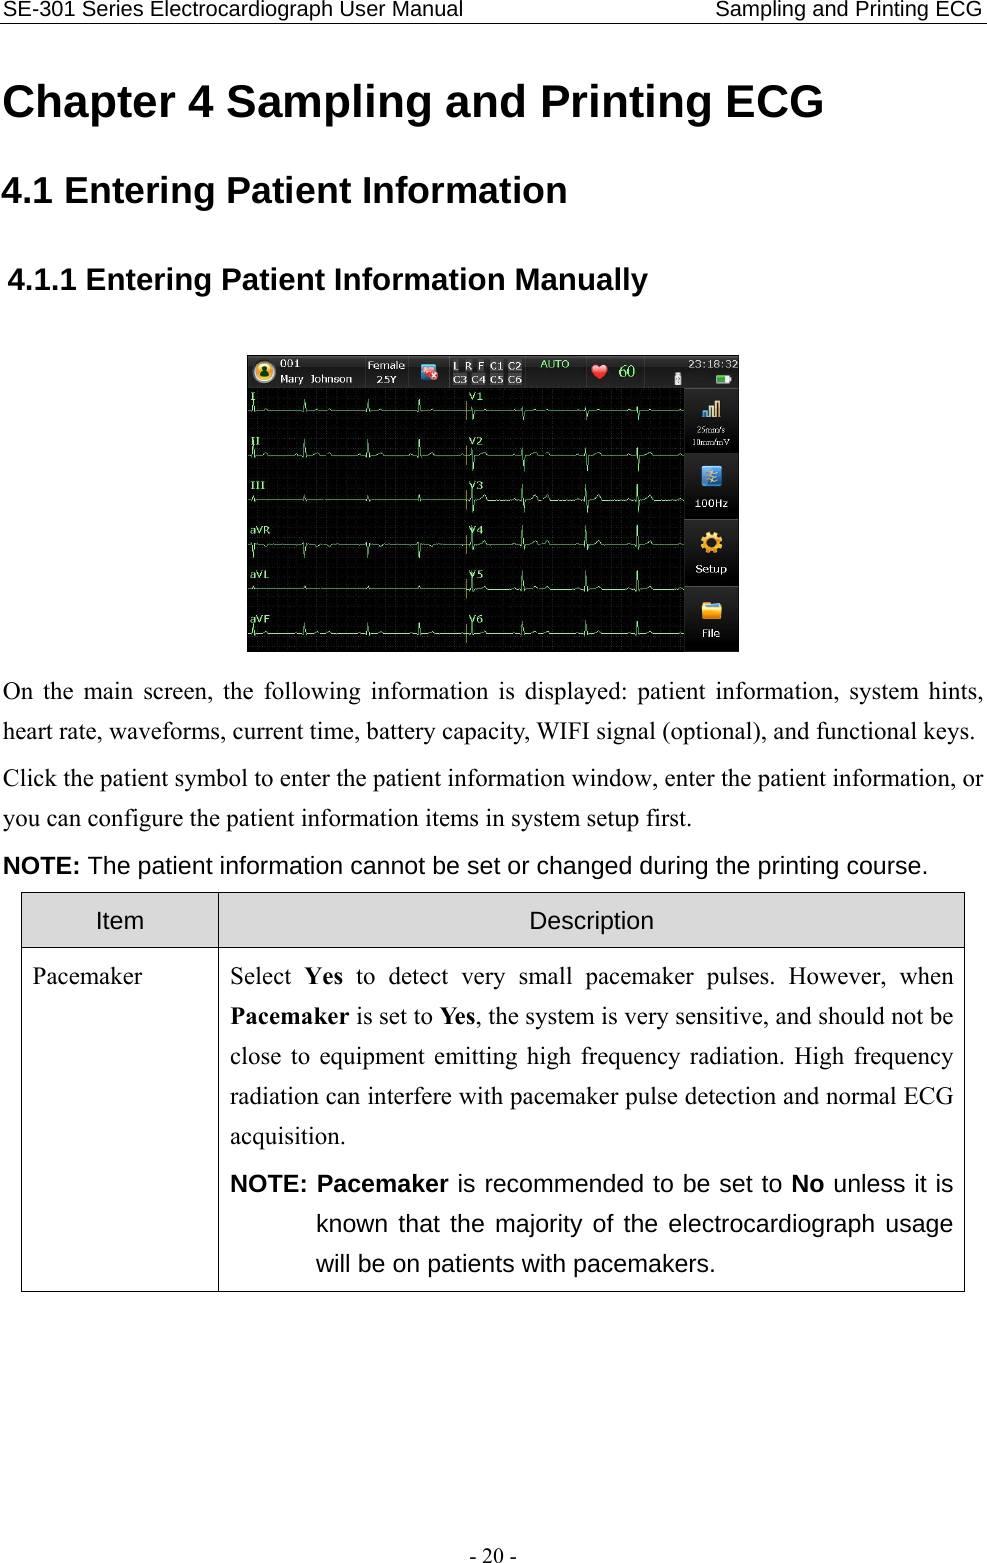 SE-301 Series Electrocardiograph User Manual                       Sampling and Printing ECG - 20 - Chapter 4 Sampling and Printing ECG 4.1 Entering Patient Information 4.1.1 Entering Patient Information Manually  On the main screen, the following information is displayed: patient information, system hints, heart rate, waveforms, current time, battery capacity, WIFI signal (optional), and functional keys. Click the patient symbol to enter the patient information window, enter the patient information, or you can configure the patient information items in system setup first. NOTE: The patient information cannot be set or changed during the printing course. Item  Description Pacemaker  Select  Yes to detect very small pacemaker pulses. However, when Pacemaker is set to Ye s , the system is very sensitive, and should not be close to equipment emitting high frequency radiation. High frequency radiation can interfere with pacemaker pulse detection and normal ECG acquisition. NOTE: Pacemaker is recommended to be set to No unless it is known that the majority of the electrocardiograph usage will be on patients with pacemakers. 